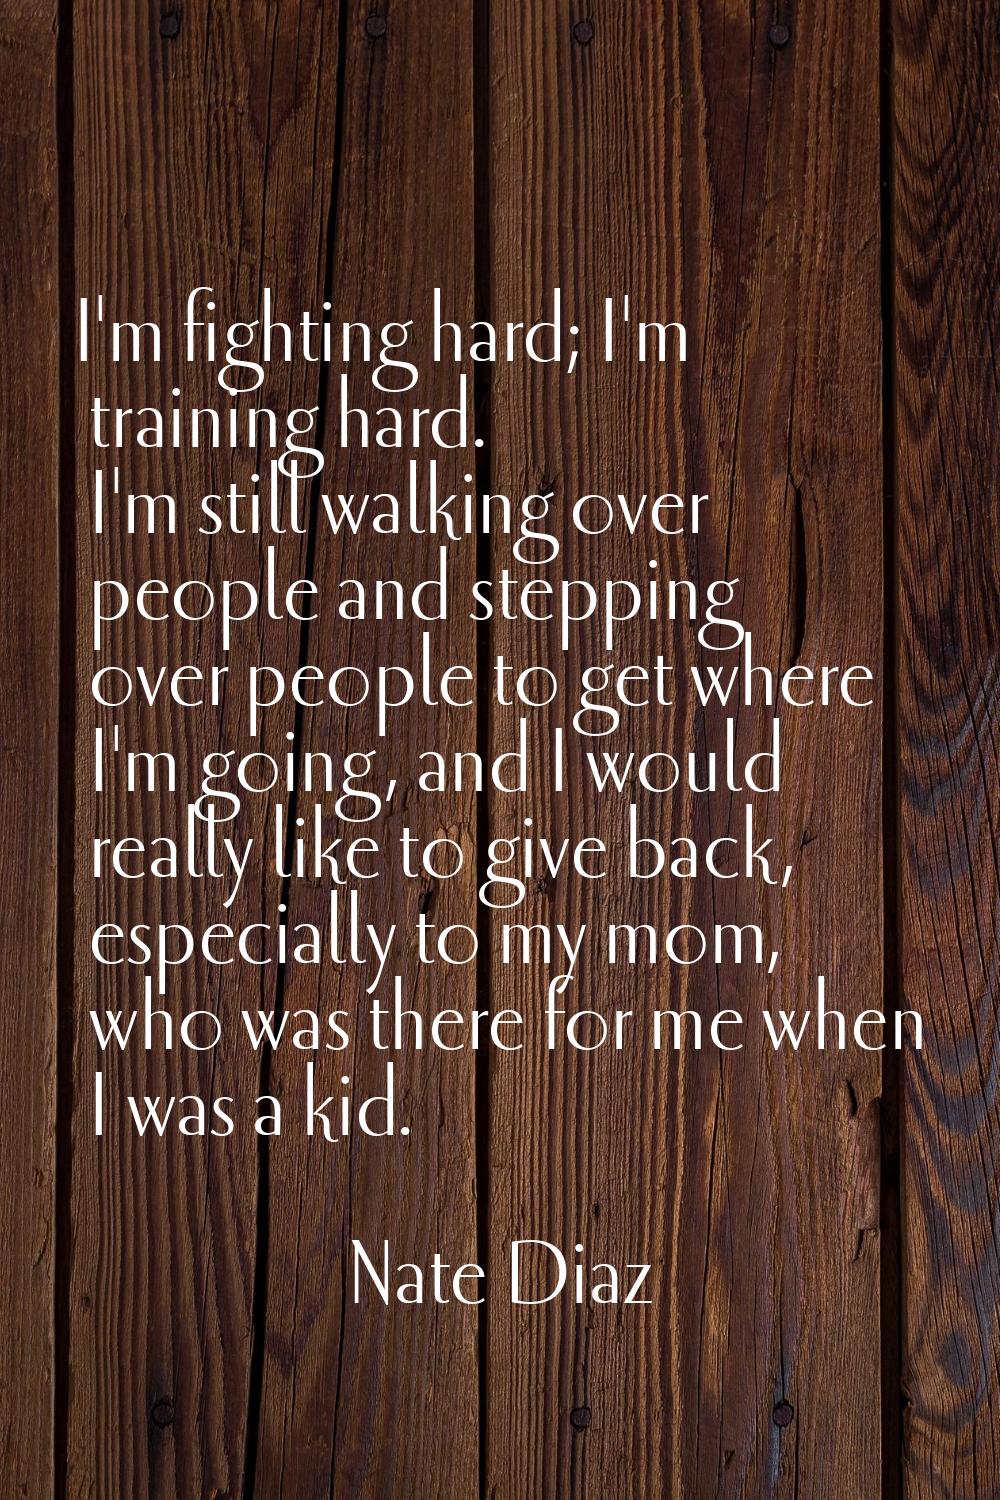 I'm fighting hard; I'm training hard. I'm still walking over people and stepping over people to get